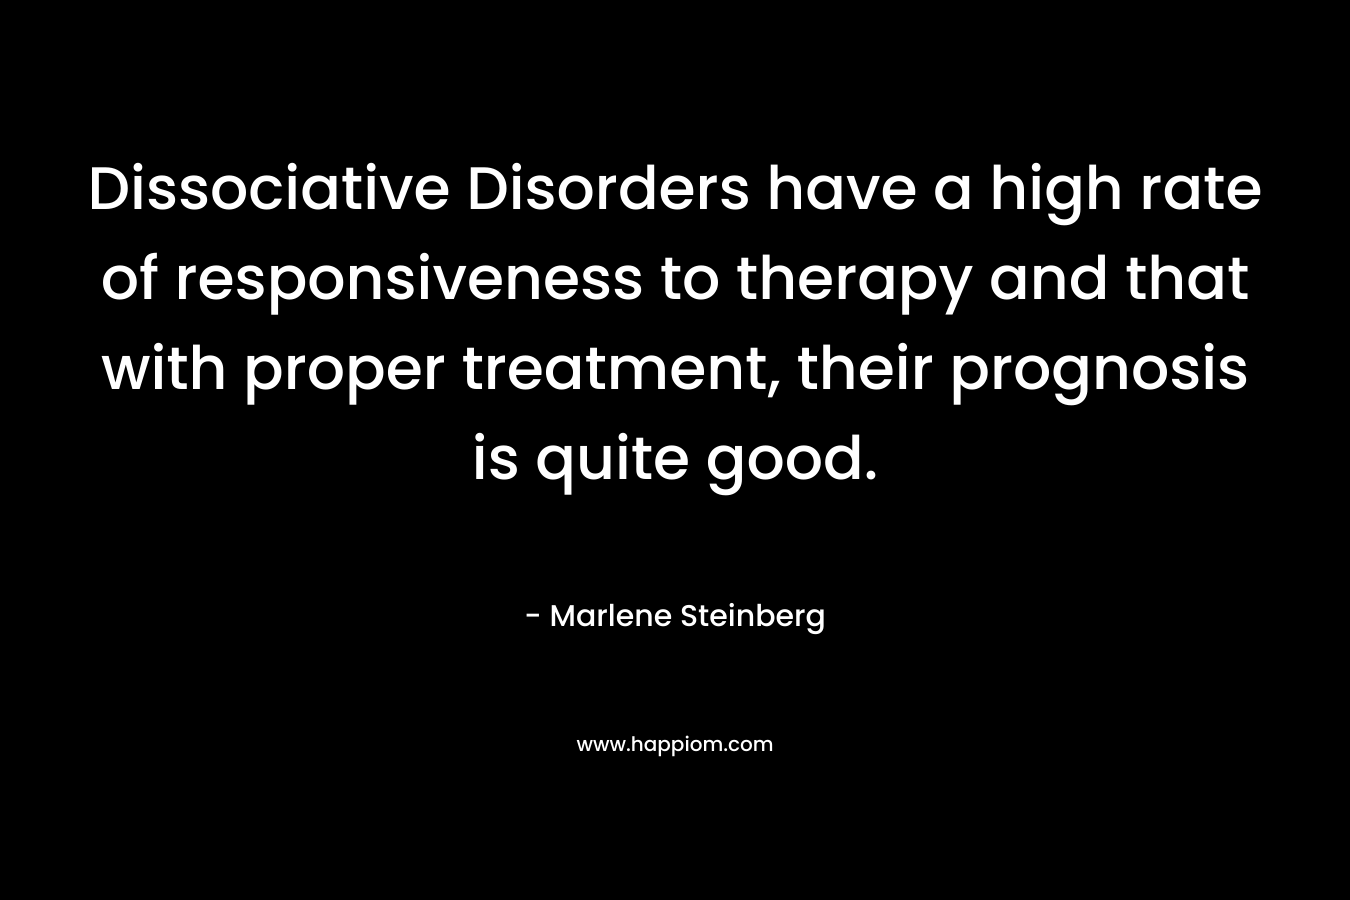 Dissociative Disorders have a high rate of responsiveness to therapy and that with proper treatment, their prognosis is quite good. – Marlene Steinberg